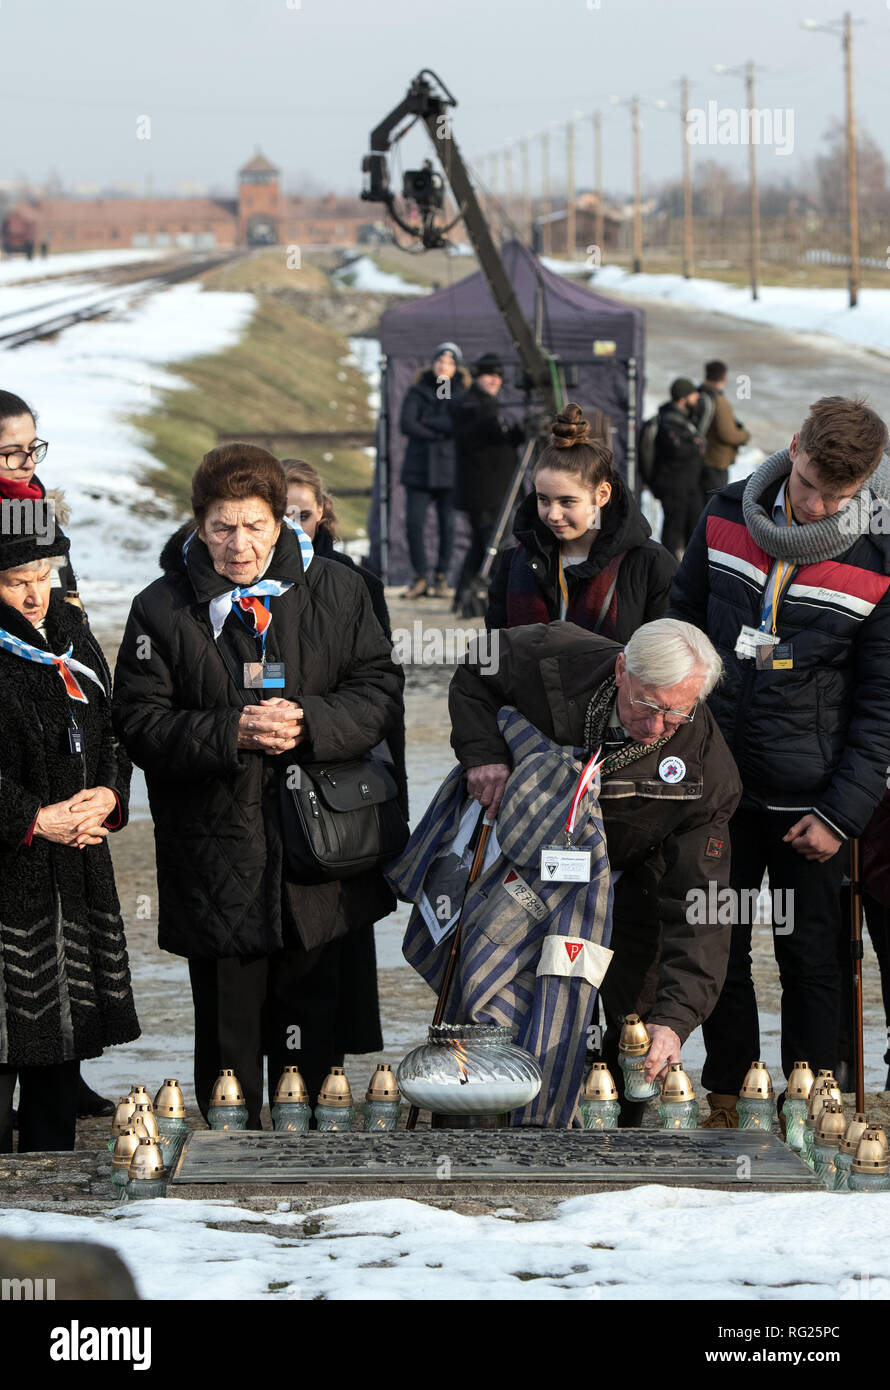 Oswiecim, Poland. 27th Jan, 2019. Holocaust survivors and their relatives place candles on a plaque in the former German concentration camp Auschwitz-Birkenau during the International Holocaust Memorial Day ceremony. Credit: Bernd Thissen/dpa/Alamy Live News Stock Photo